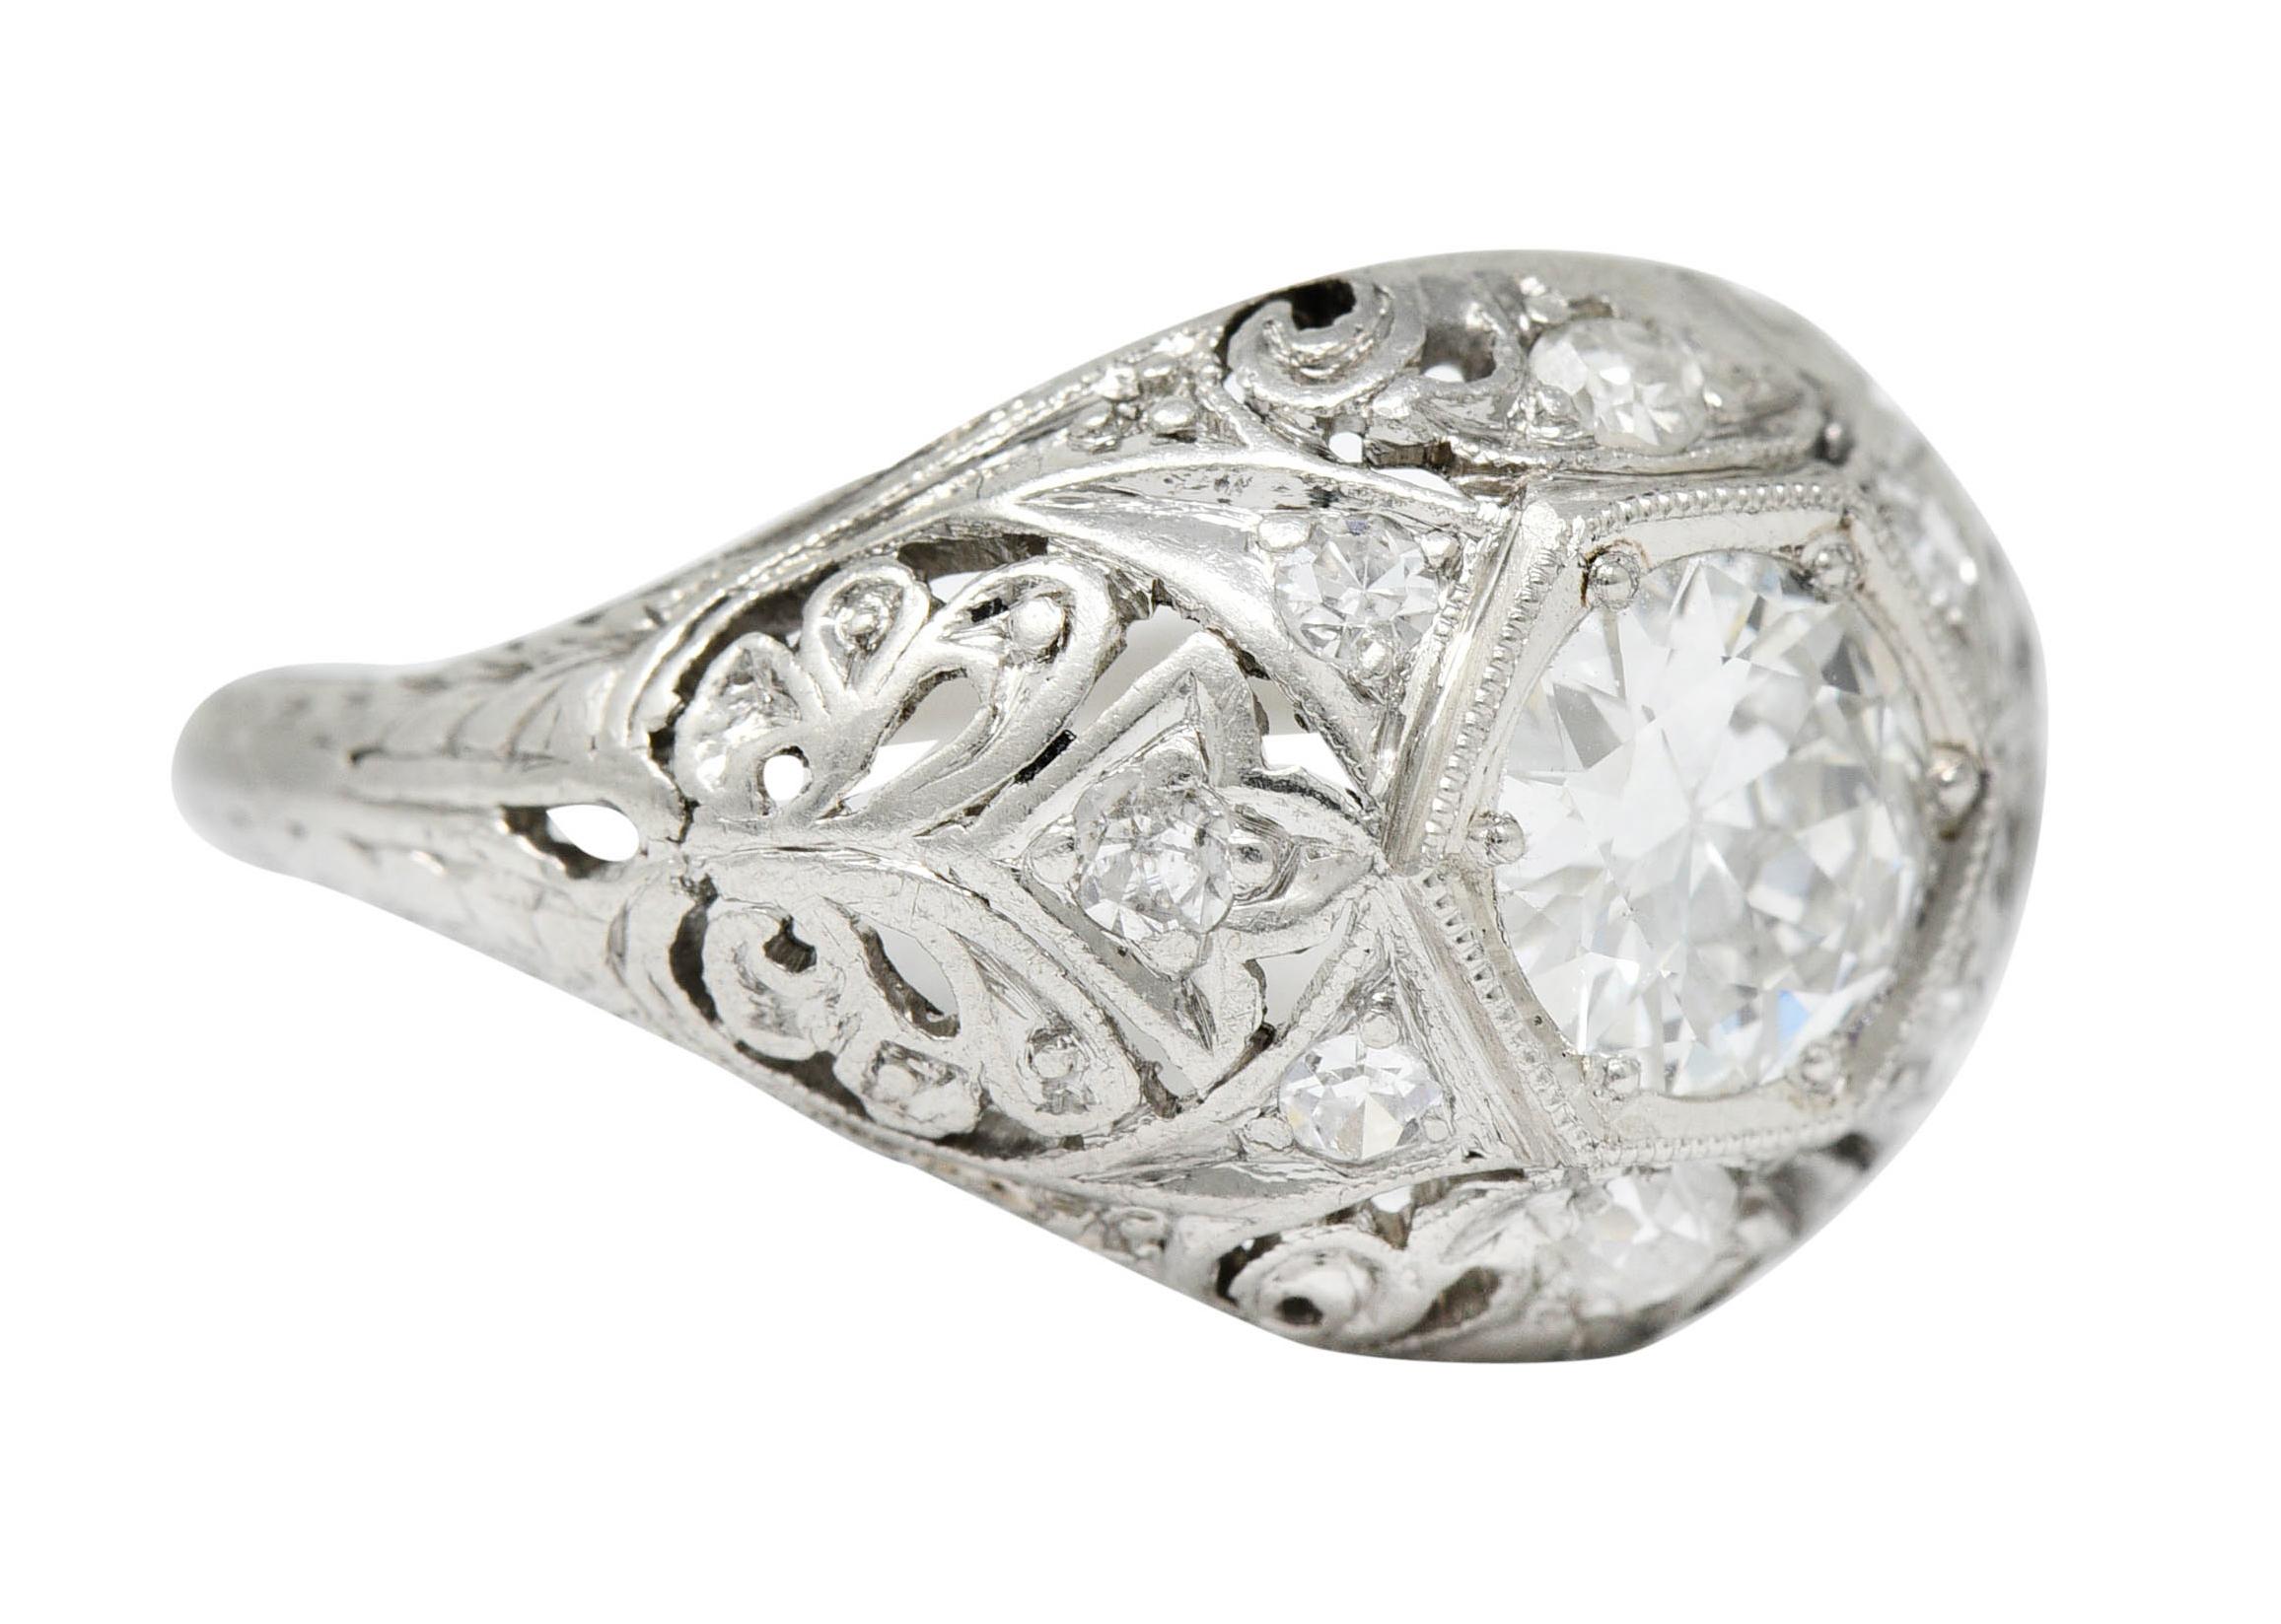 Centering a transitional cut diamond weighing approximately 0.65 carat - H color with SI1 clarity

Set in a hexagonal head of an intricately pierced bombè style band - featuring scrolling foliate throughout

Accented by old European and single cut